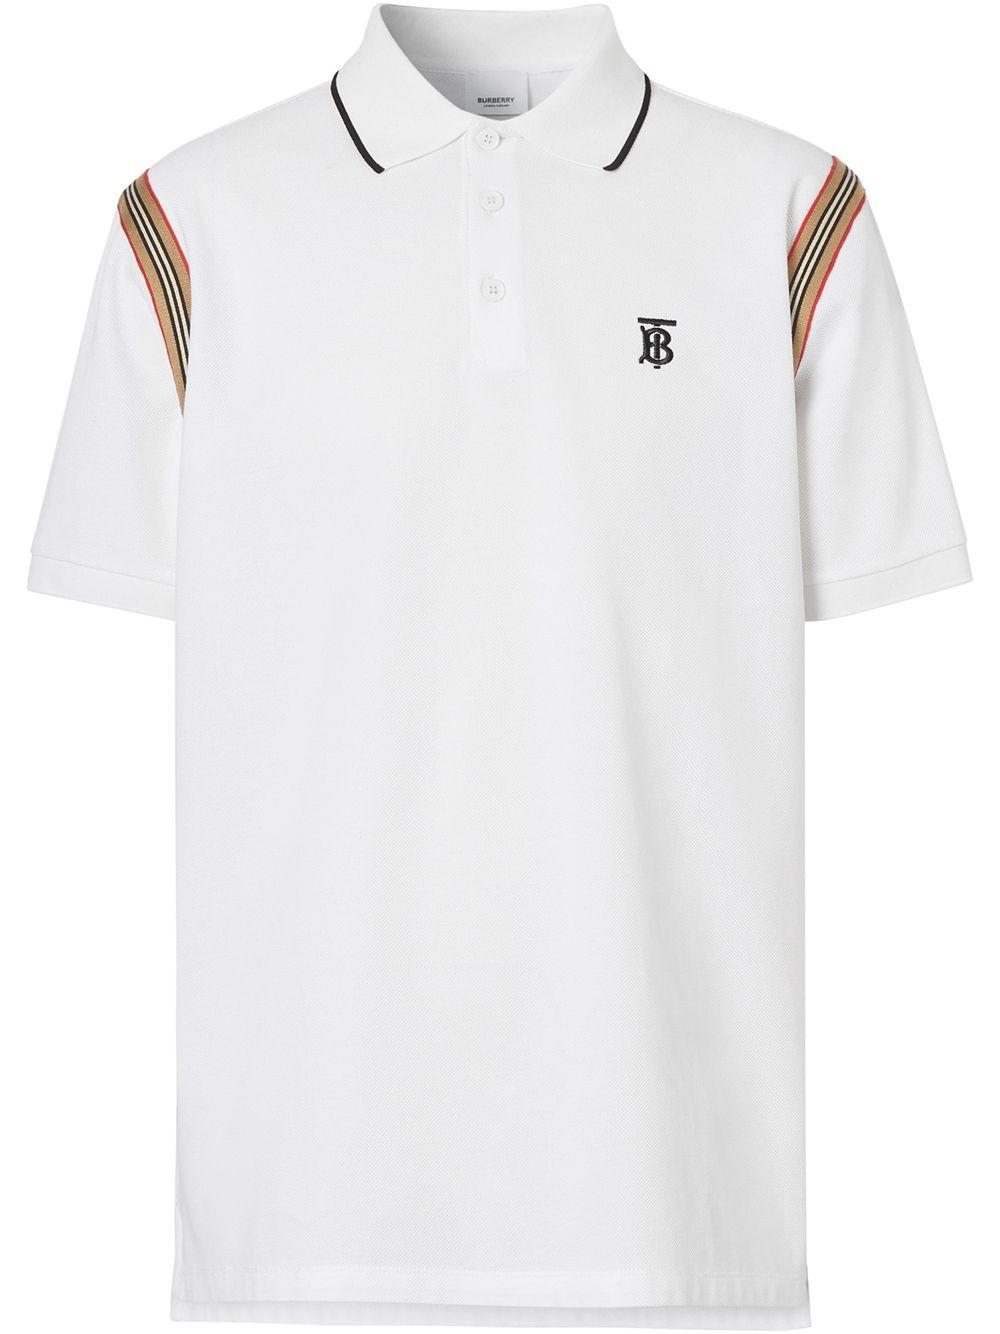 Burberry Cotton Icon Stripe Trimmed Polo Shirt in White for Men - Save ...